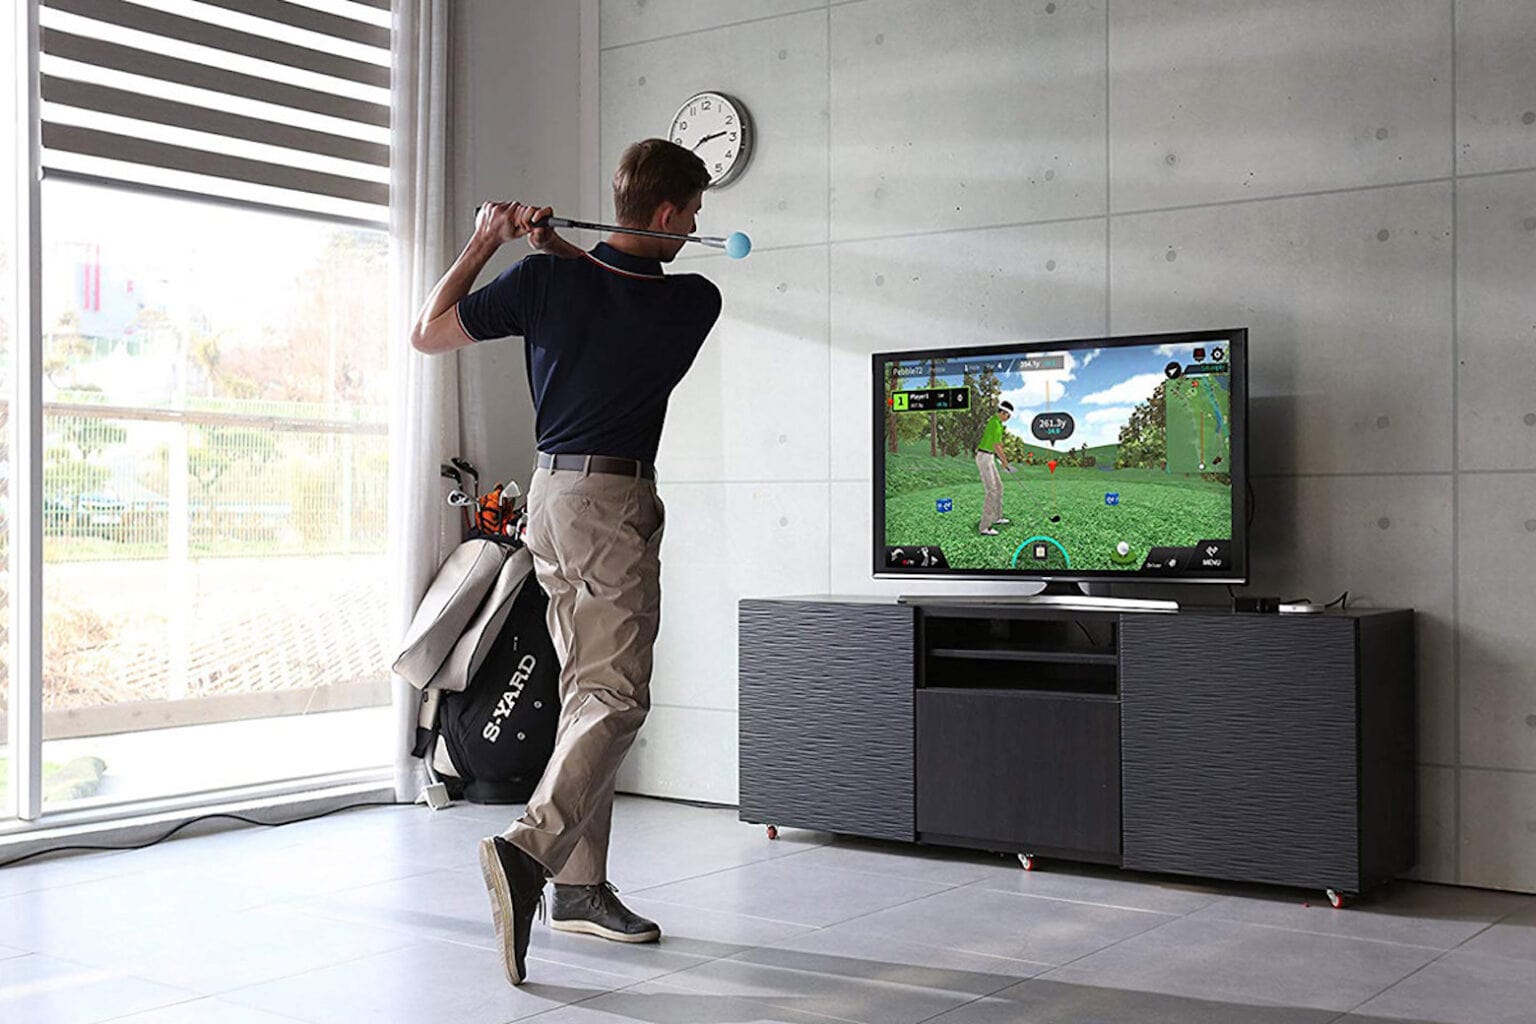 Improve your golf swing with this virtual simulator.